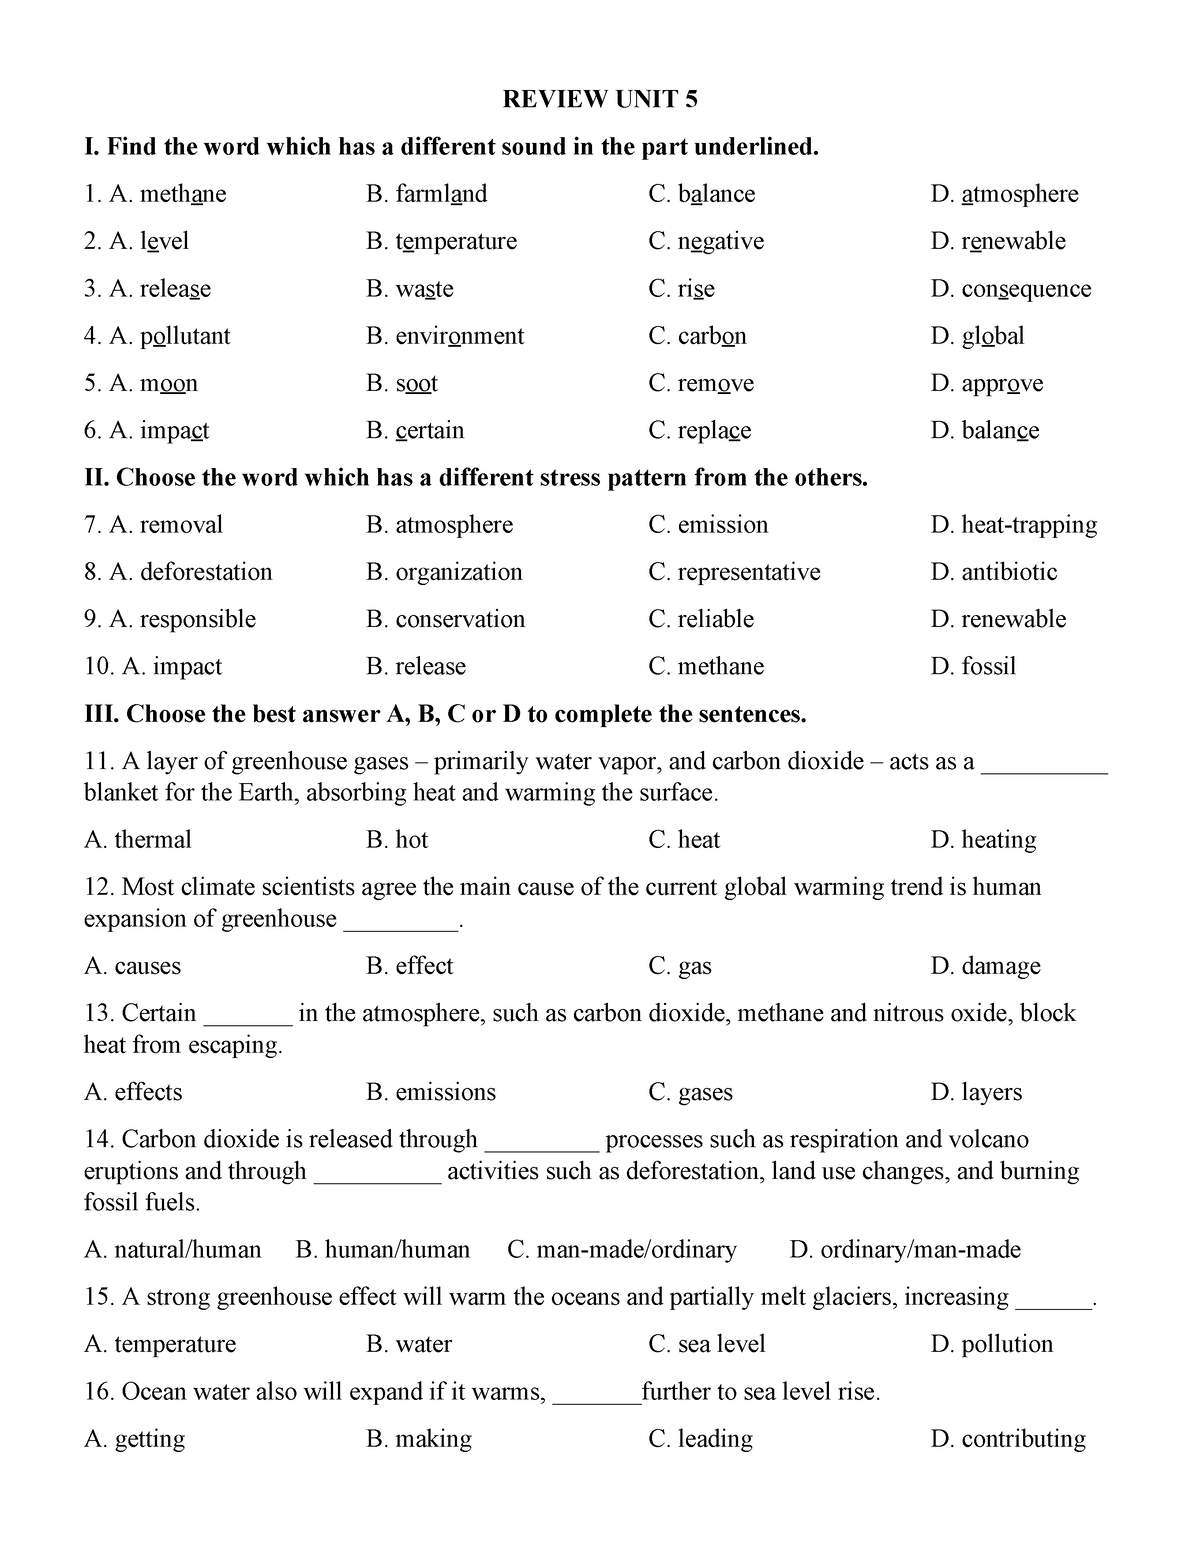 Class 11 - Review UNIT 5 - REVIEW UNIT 5 I. Find the word which has a ...